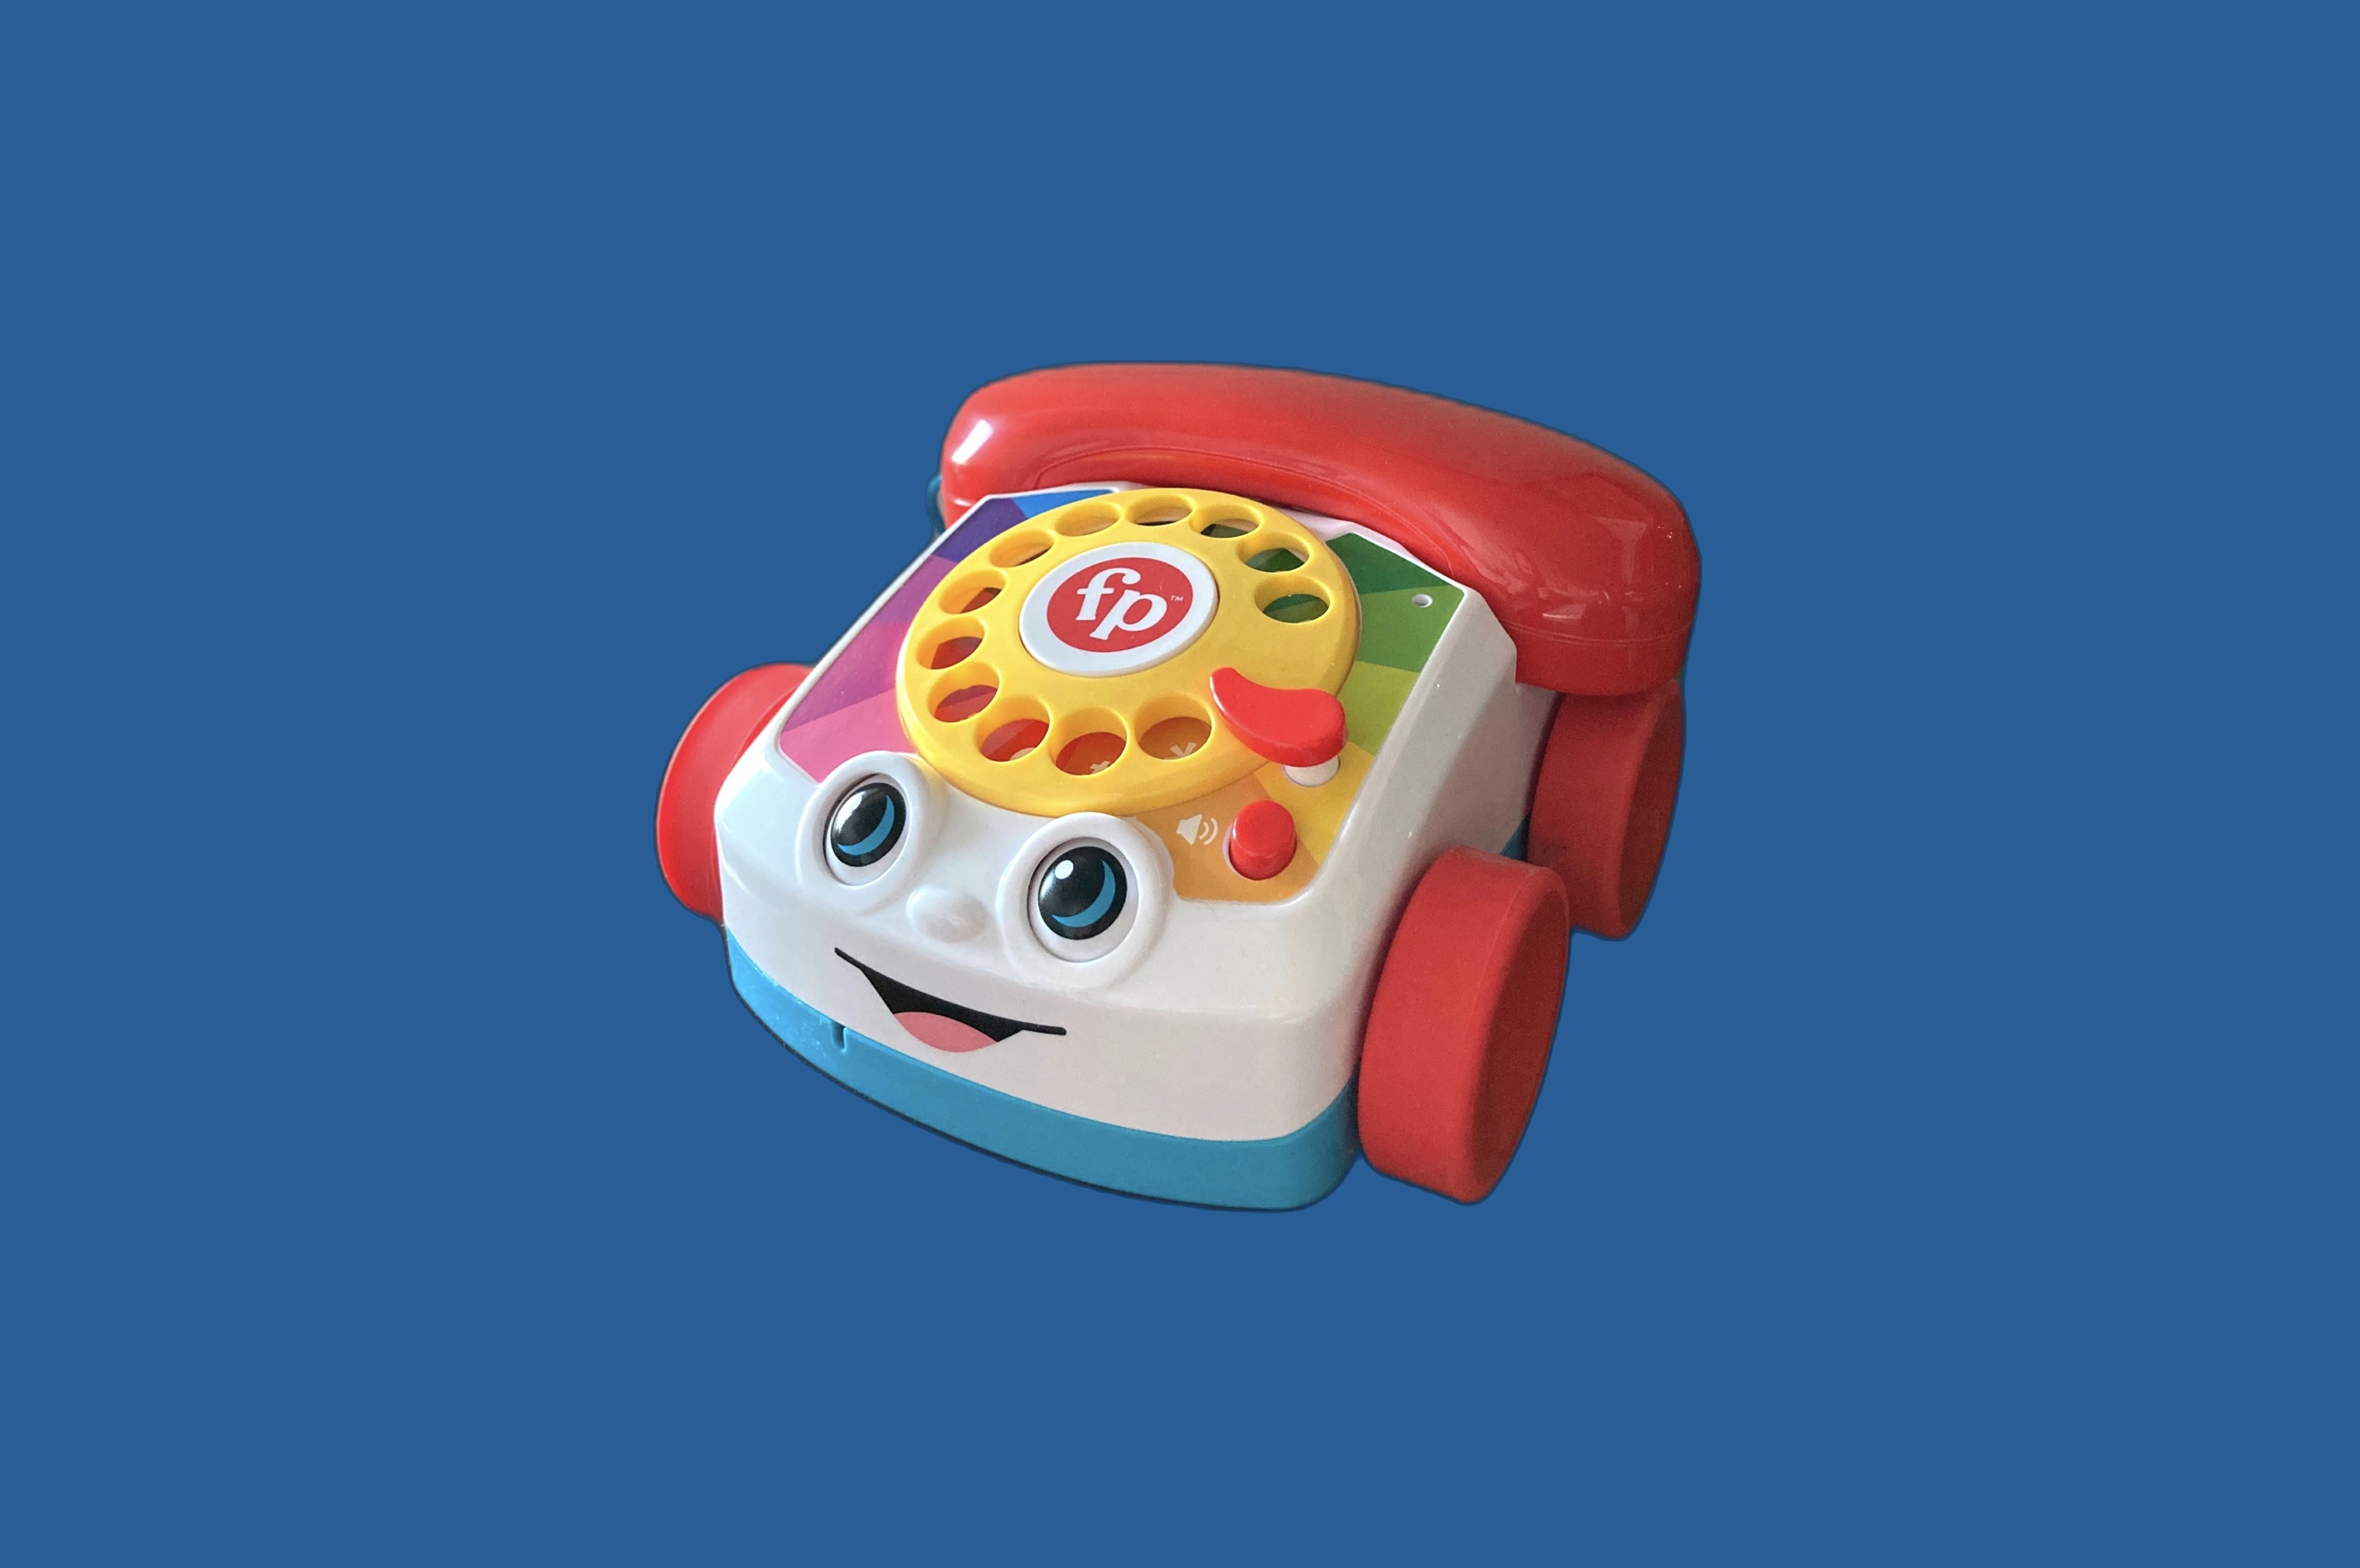 Beperkt Armoedig Vooravond Fisher-Price's Chatter phone has a simple but problematic Bluetooth bug |  TechCrunch